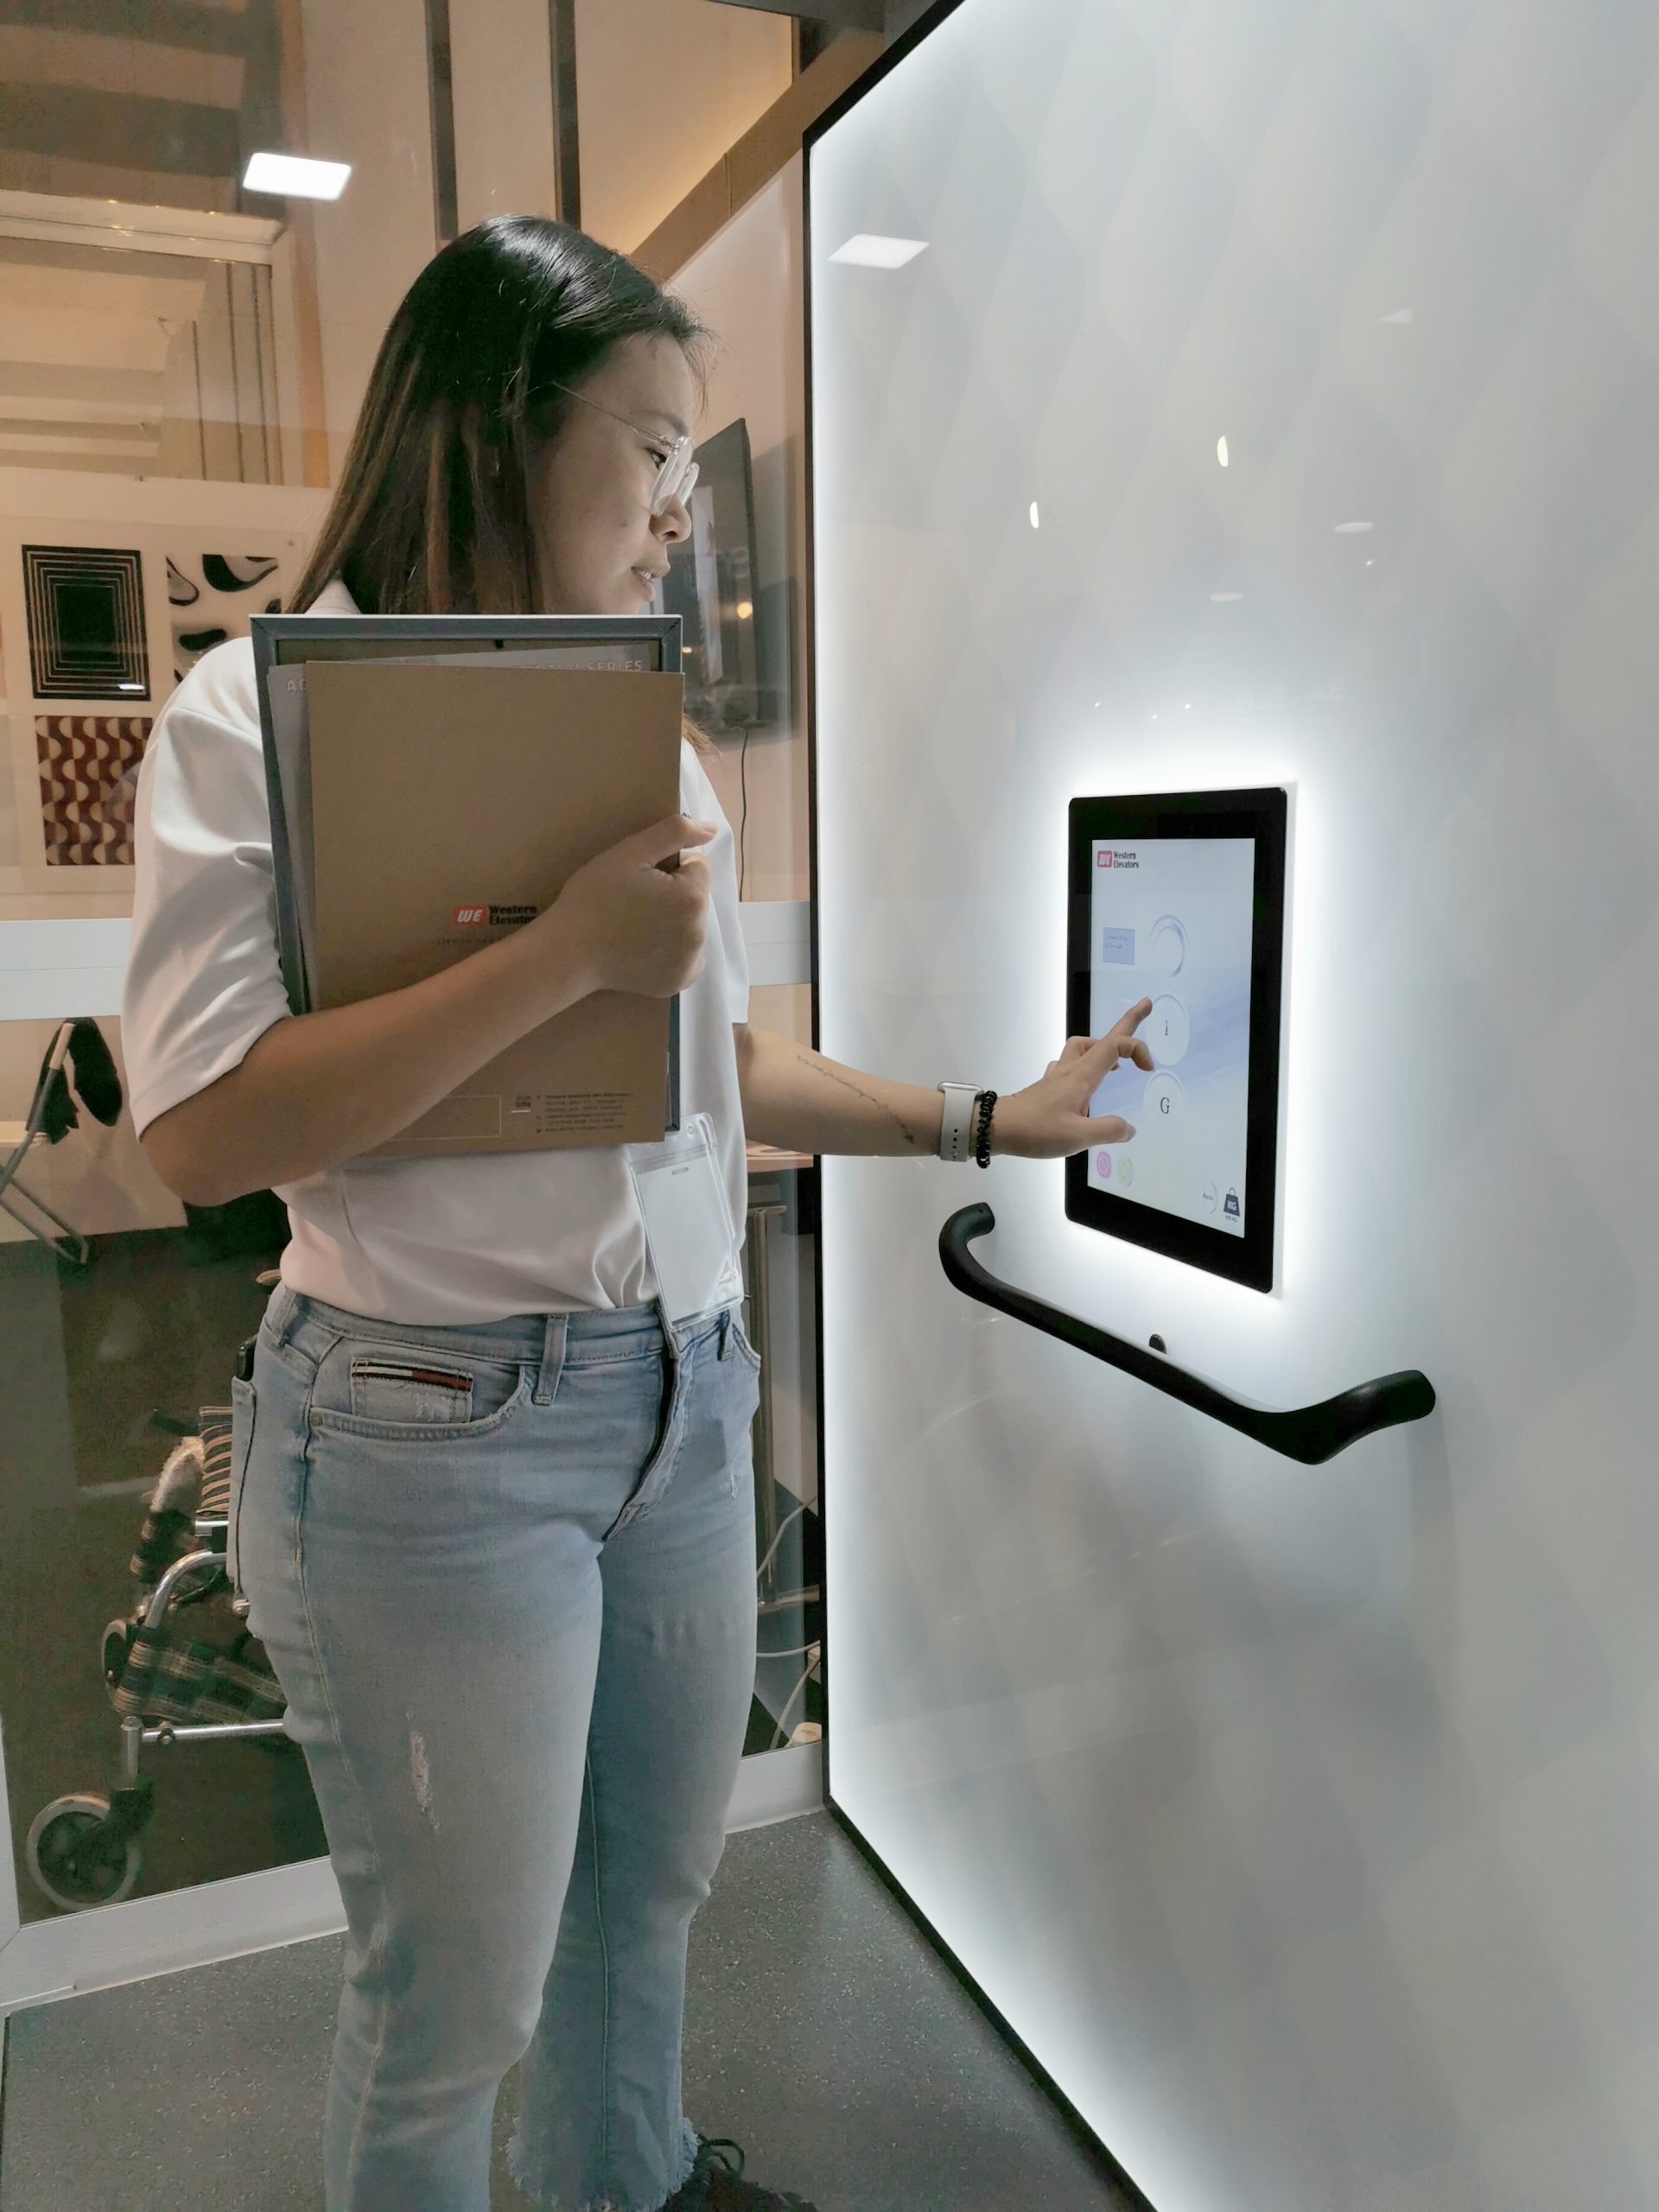 Spend some money to install smart home elevators, which will make it much more convenient for the elderly or patients to go up and down the stairs, and it will help the space utilization of high-quality homes.